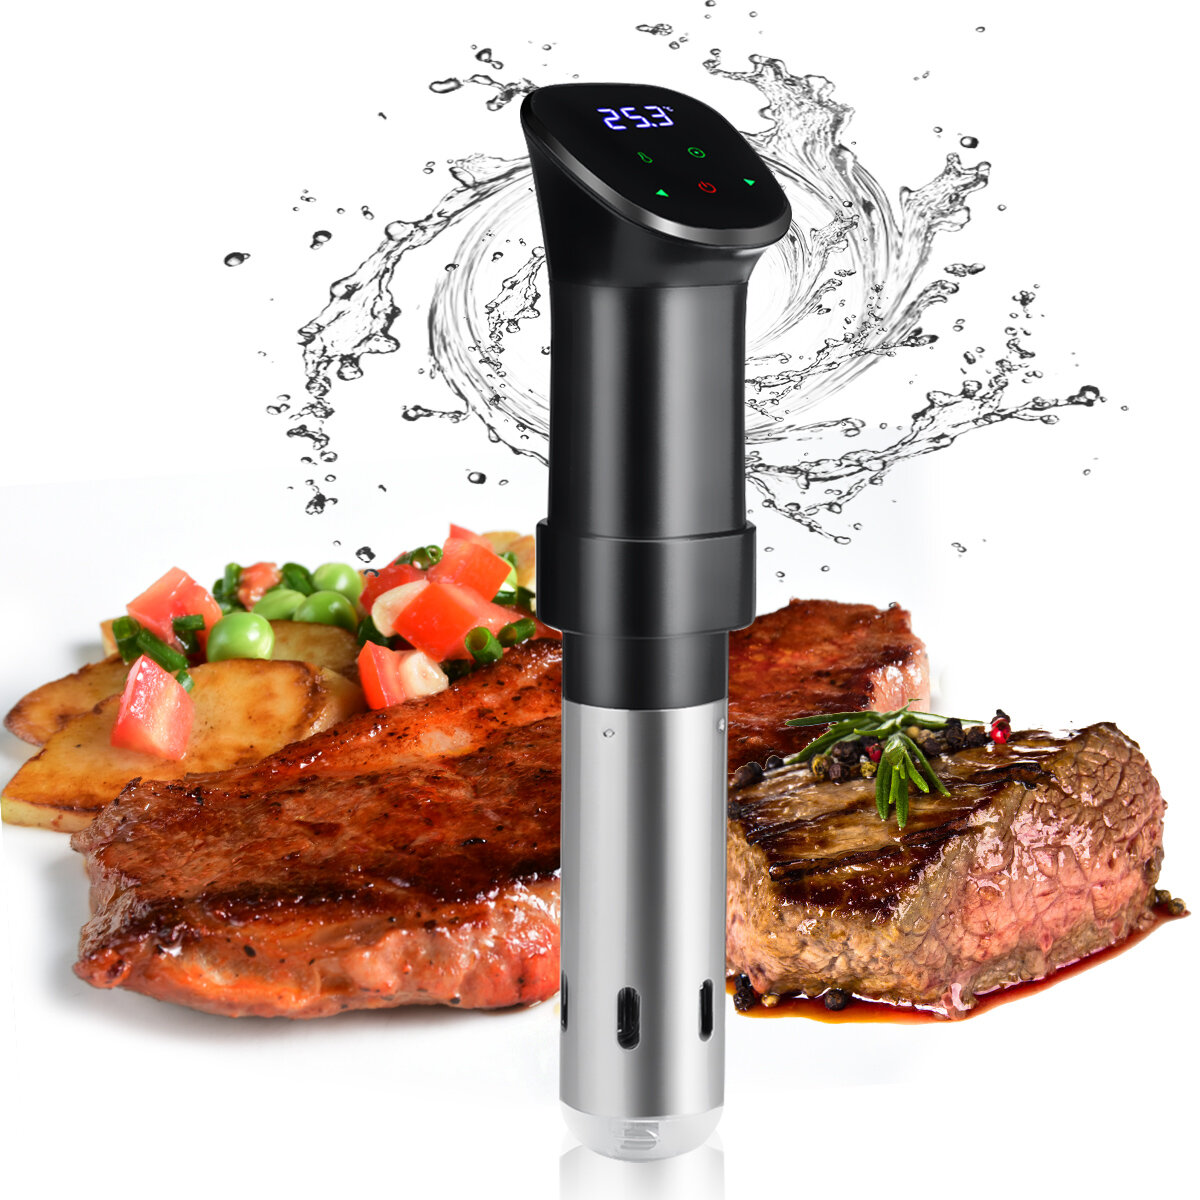 AUGIENB SC-003 1600W LCD Touch Sous Vide Cooker Waterproof Sous Vide Immersion Circulator Vacuum Hea